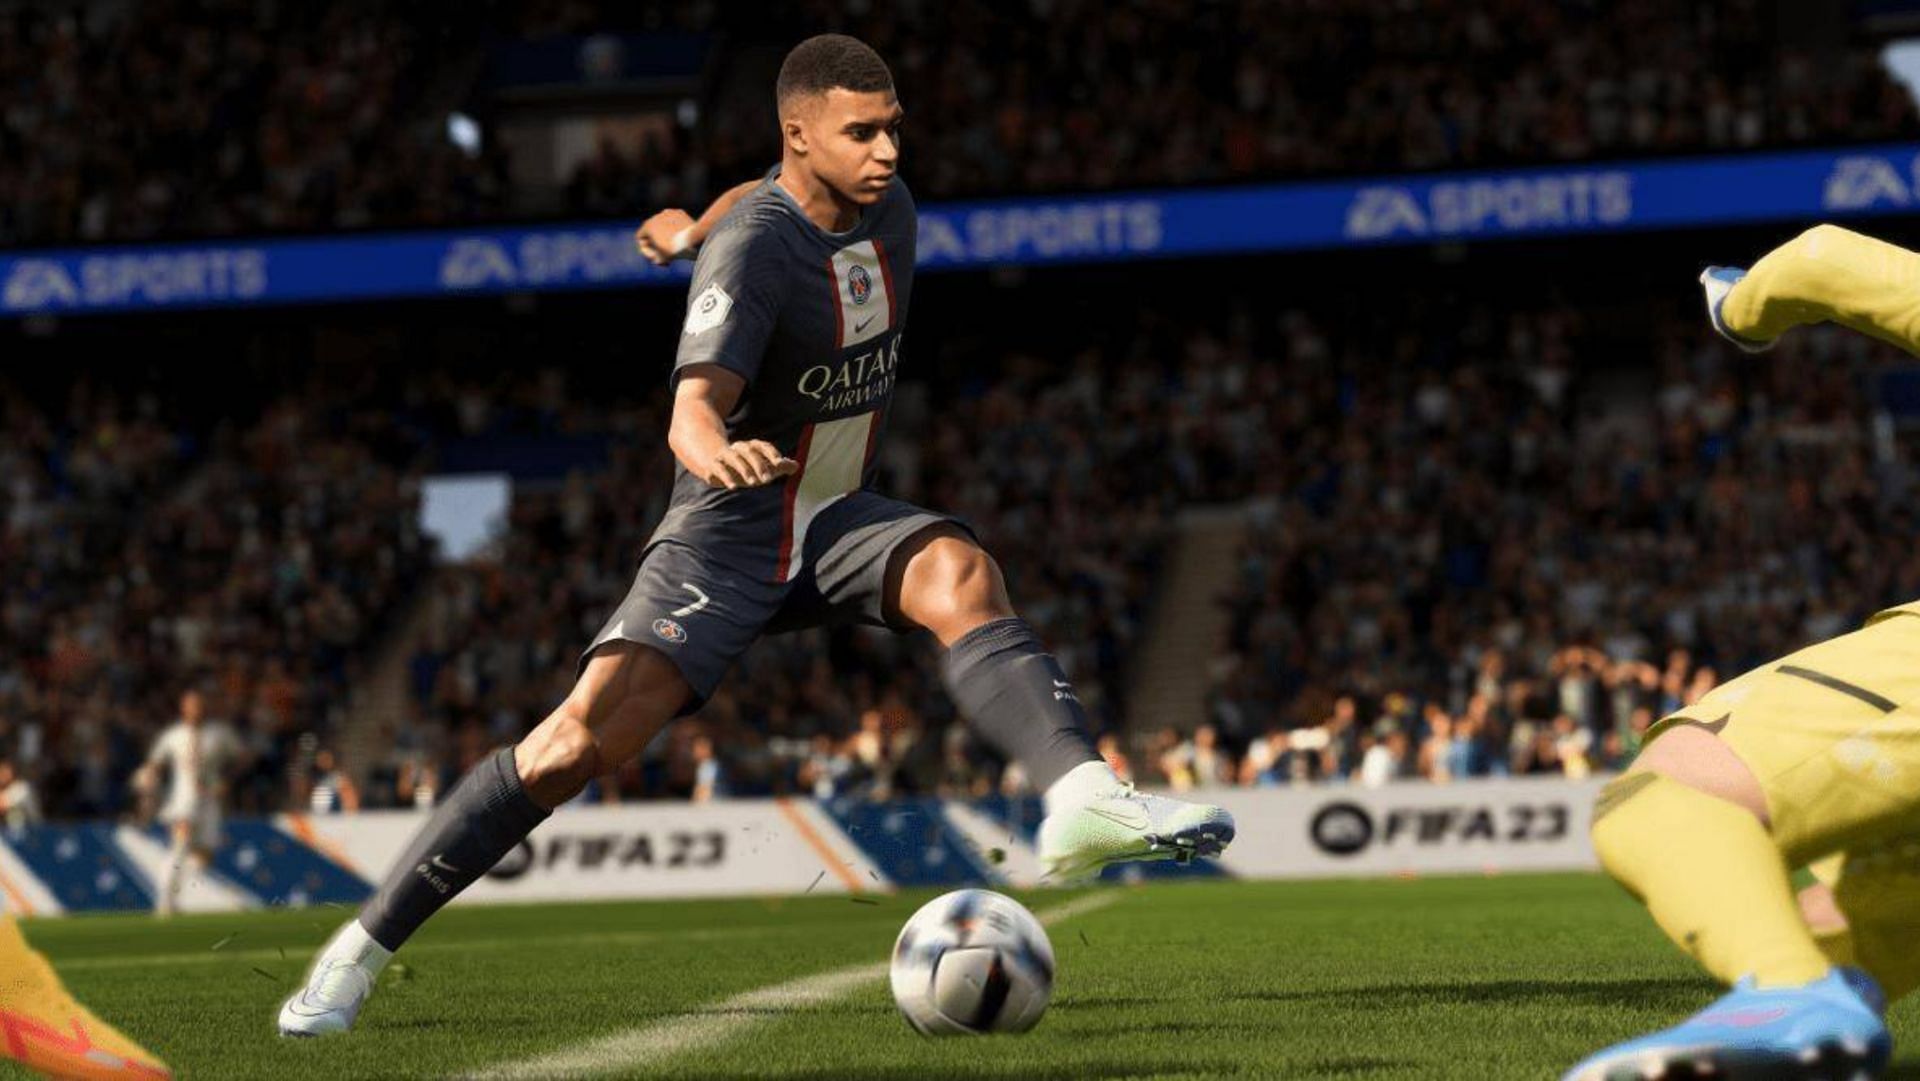 EA unable to connect to FIFA 23: How to solve, possible reasons